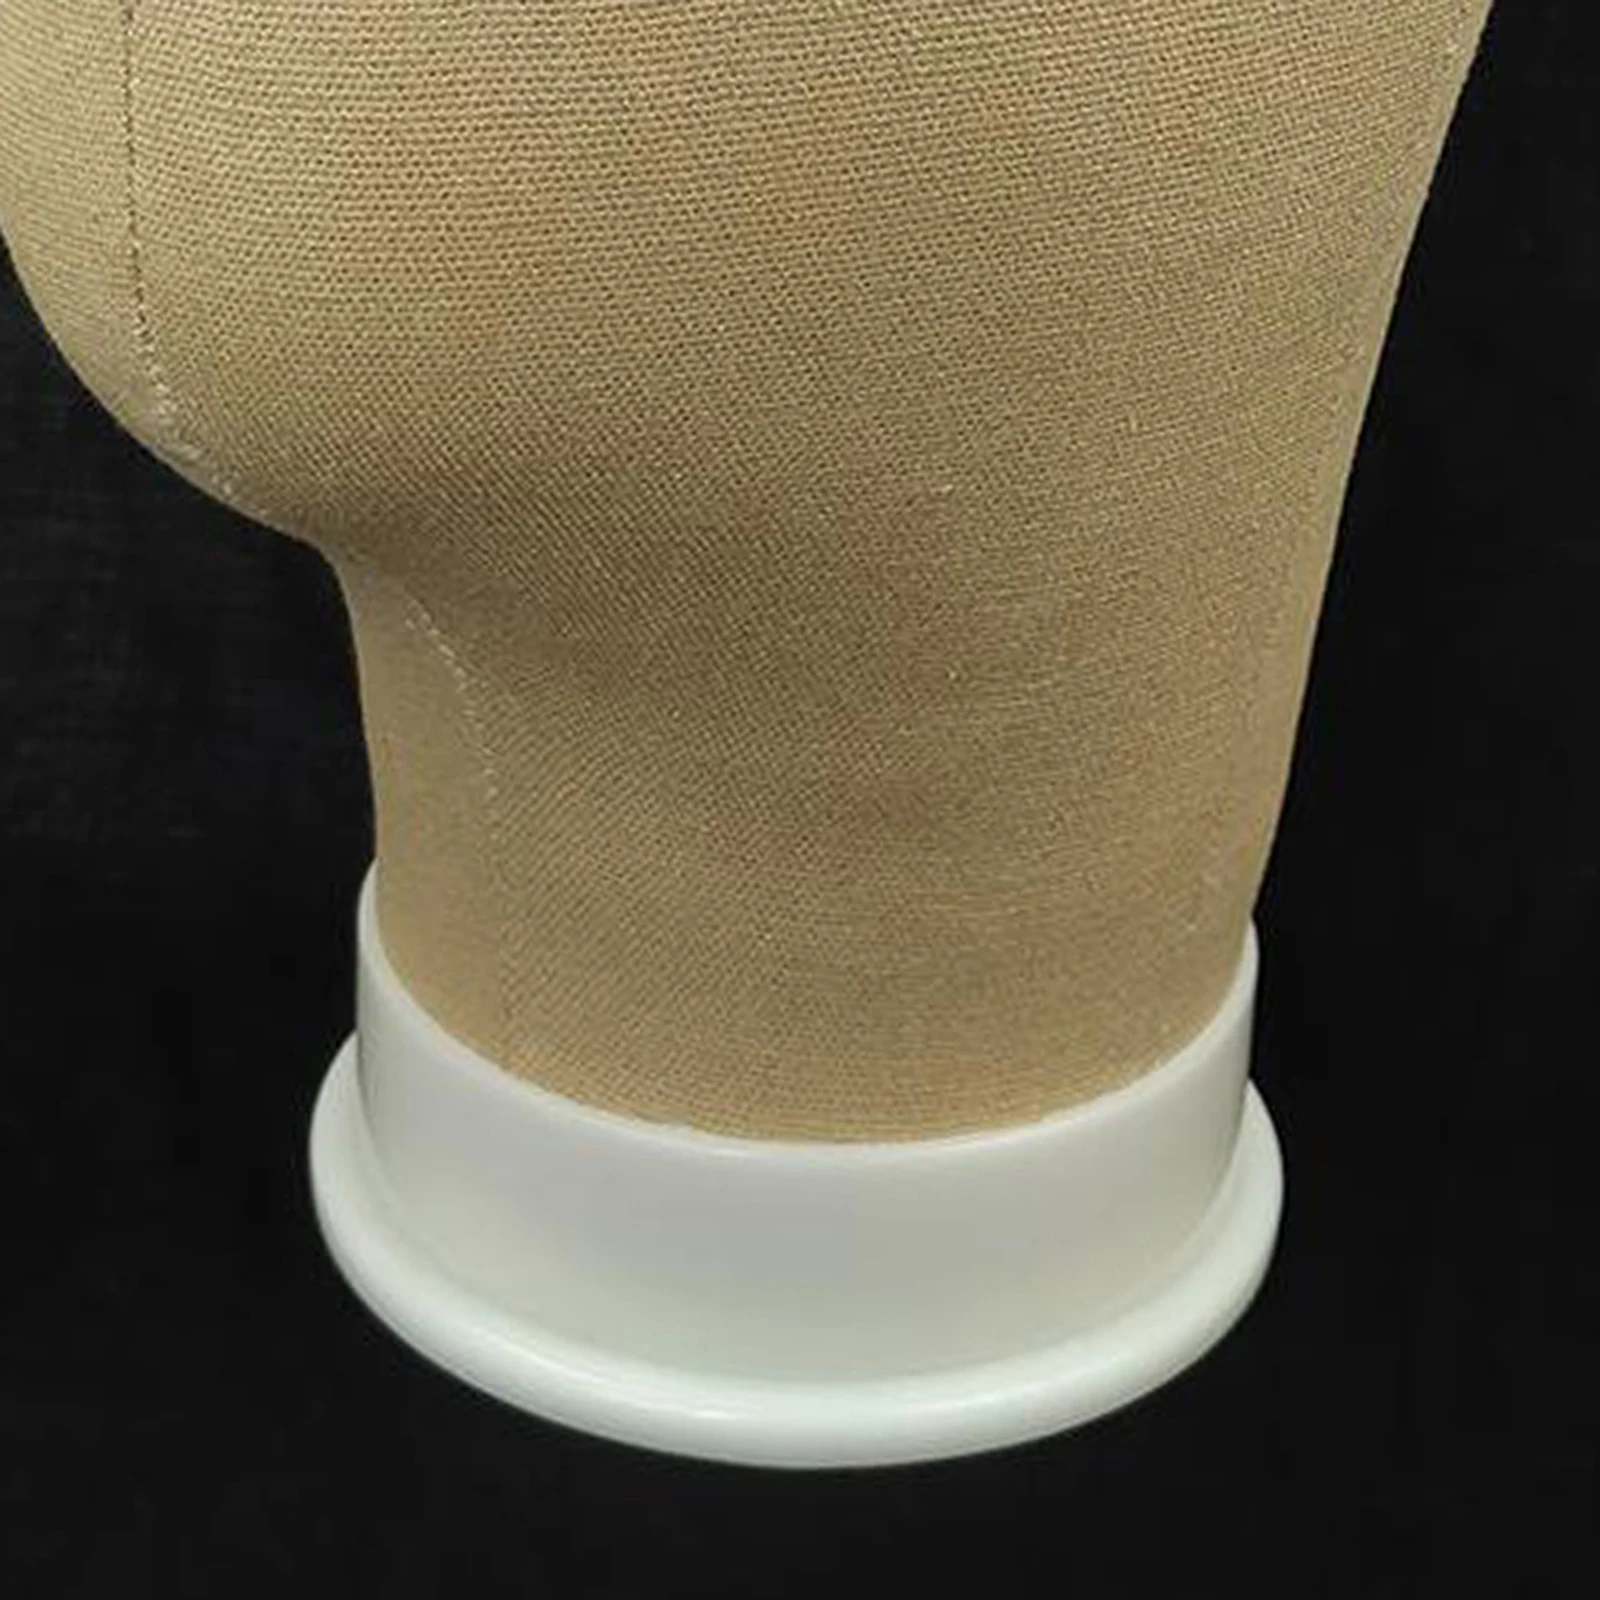 Canvas Block Head for Wig Making Mannequin head Hats Wigs Head Decorations Displaying Styling Manikin Wig Stand Holder 